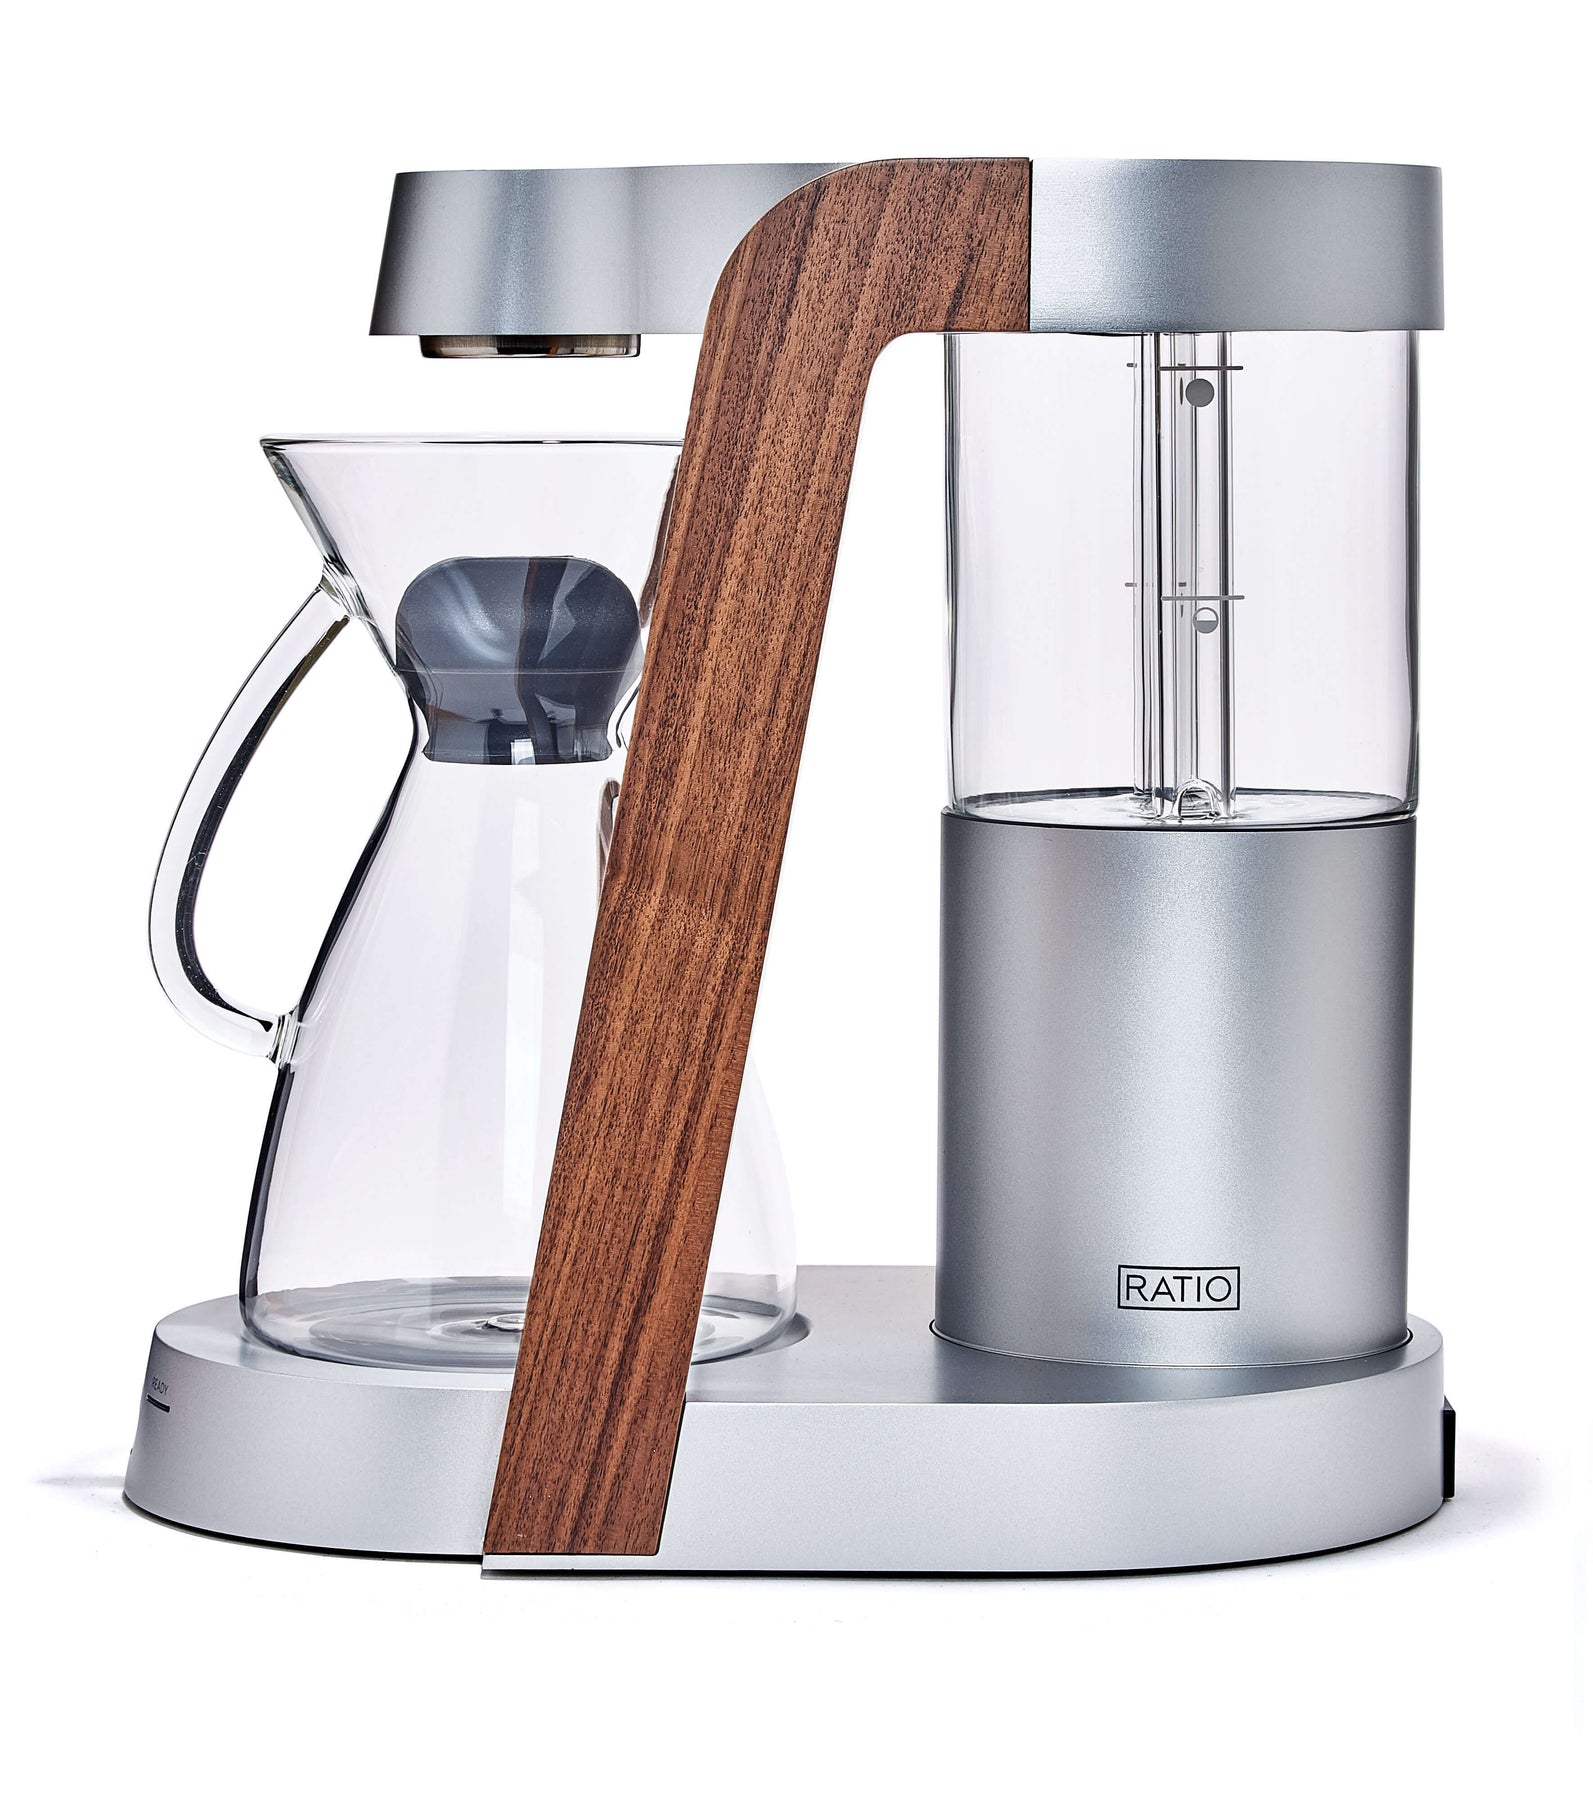 Ratio Eight Coffee Maker Review: Why It's Worth Buying